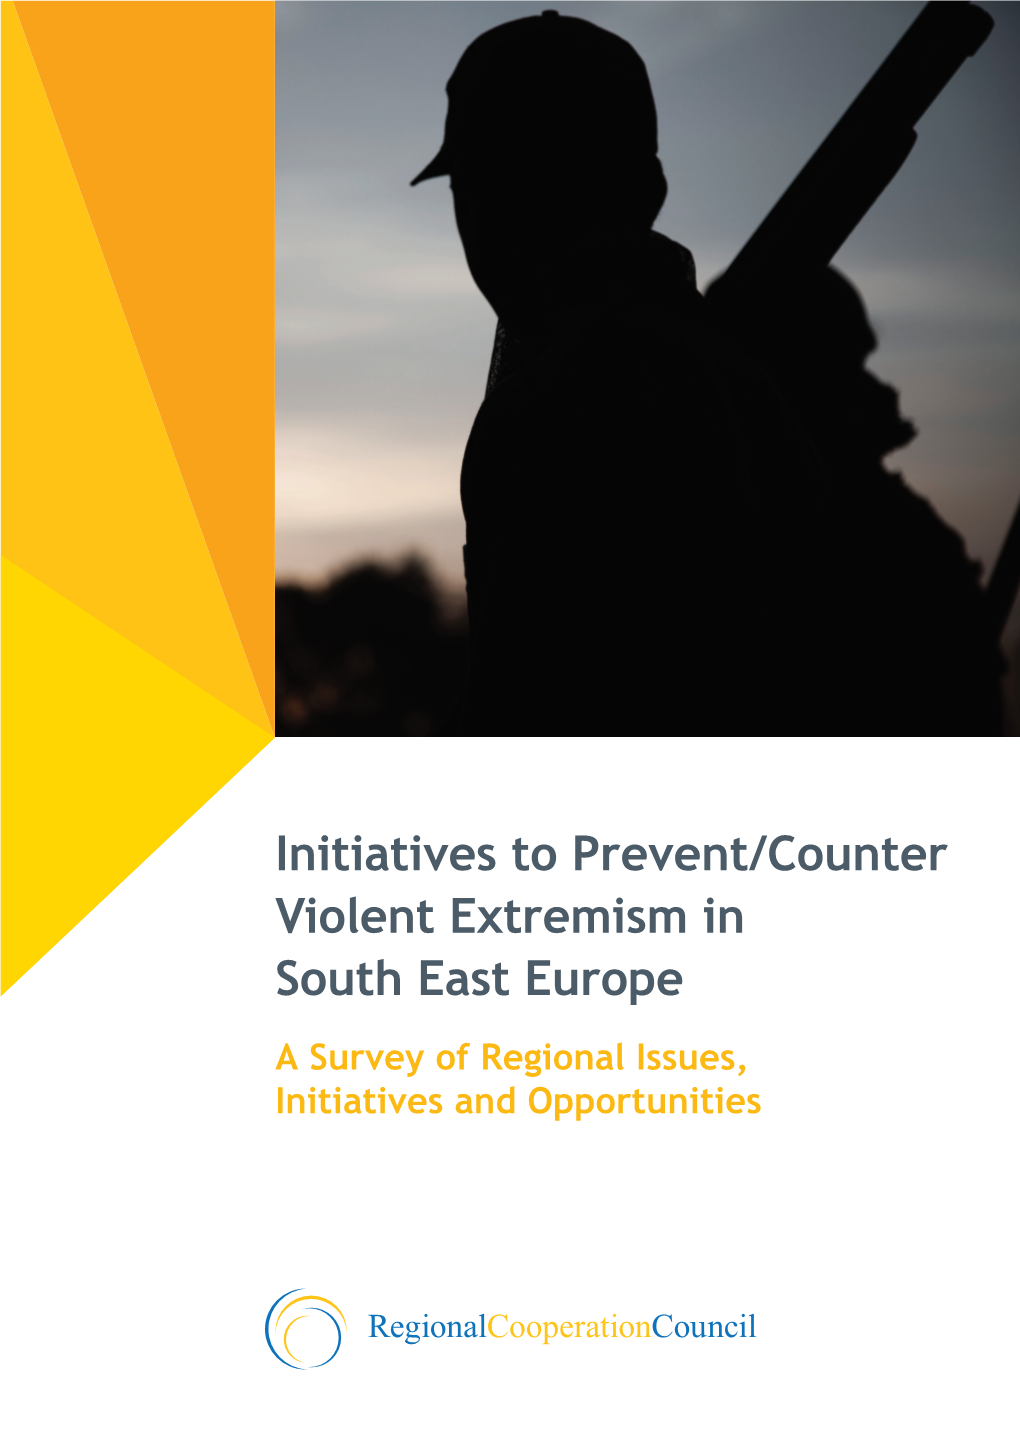 Initiatives to Prevent/Counter Violent Extremism in South East Europe a Survey of Regional Issues, Initiatives and Opportunities